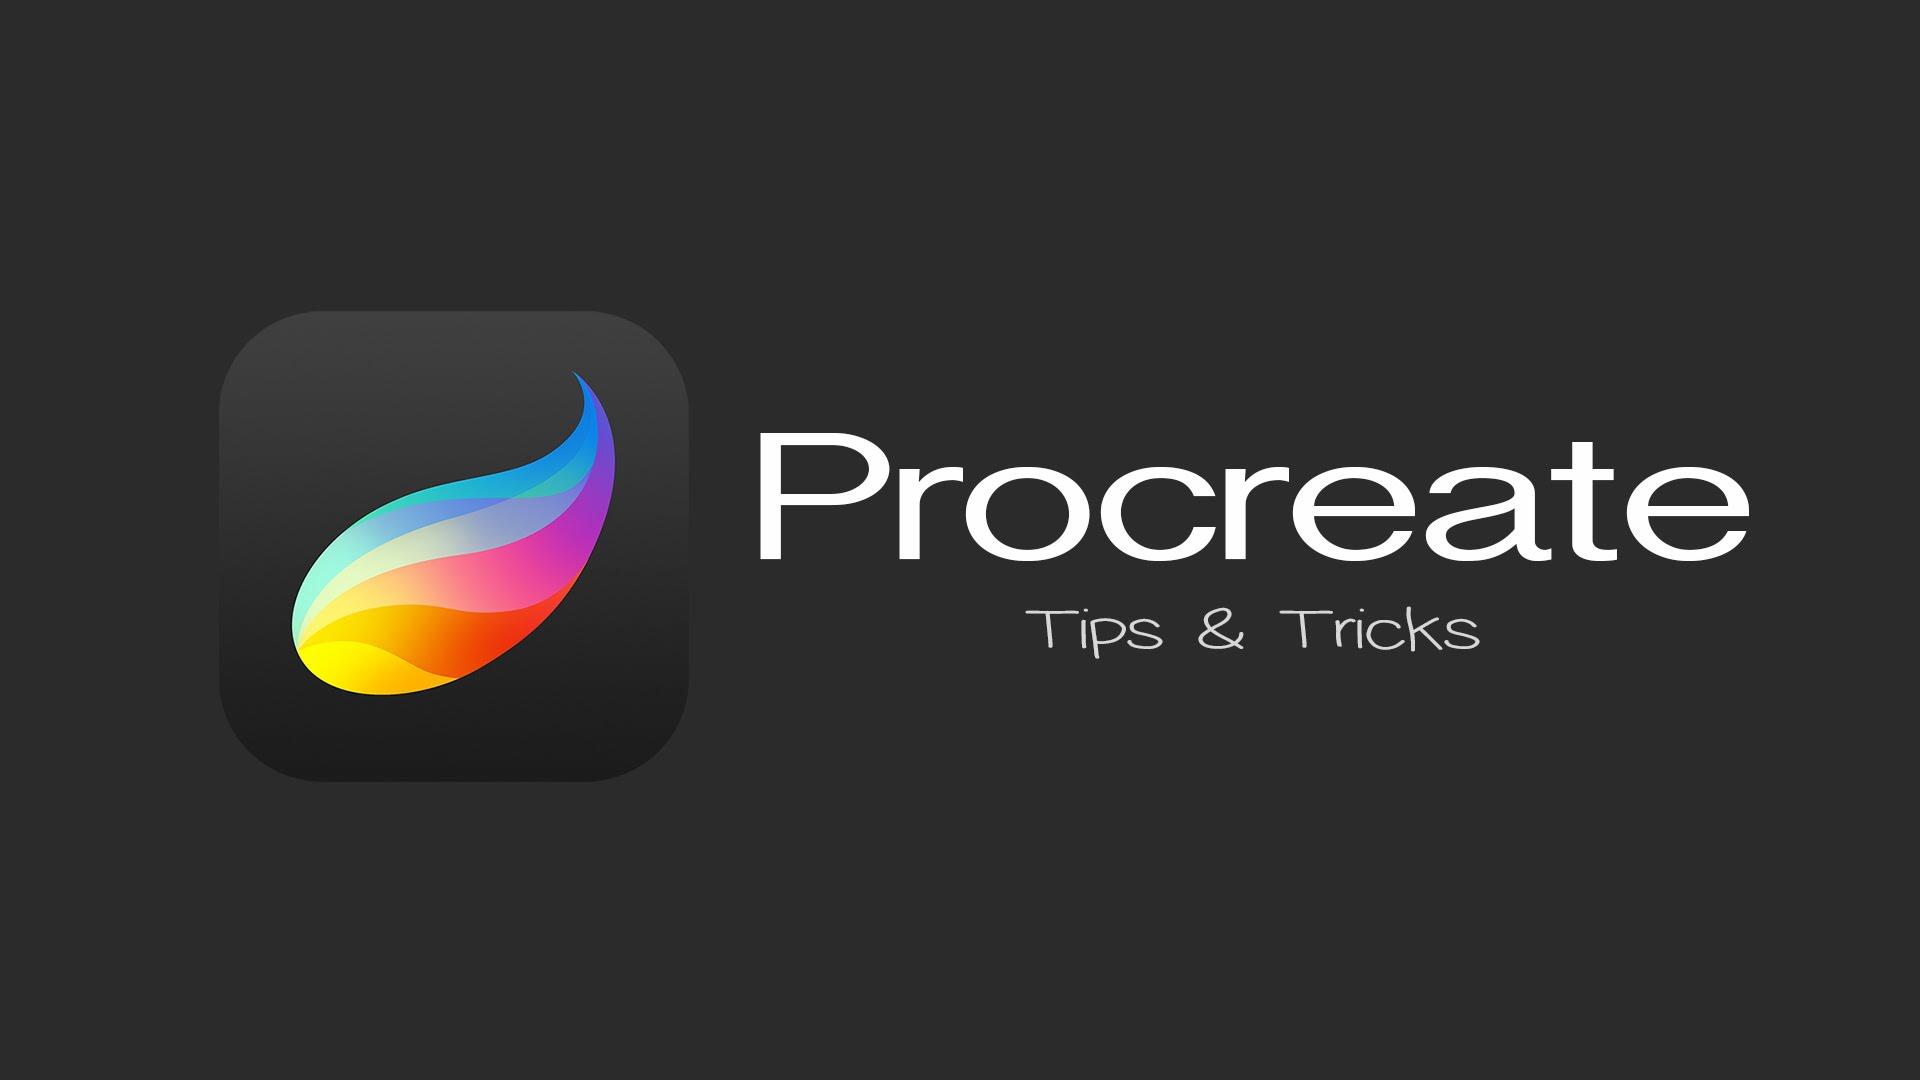 Procreate Logo - How to Ink with Apple Pencil on iPad Pro in Procreate by Stayf Draws ...